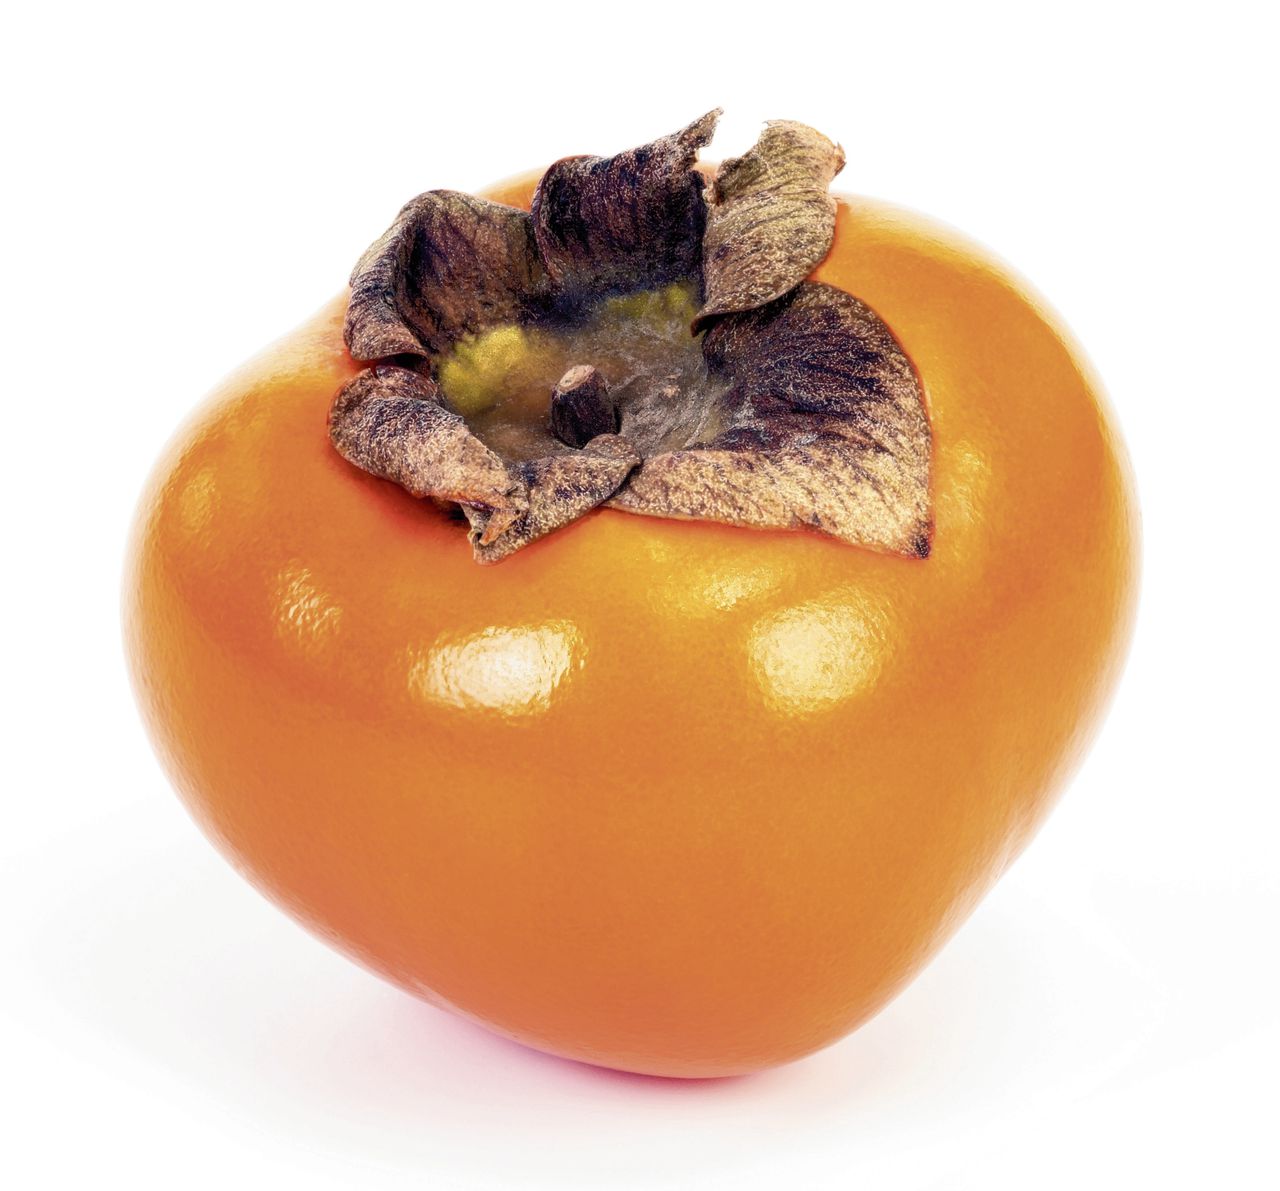 Persimmon on white background.